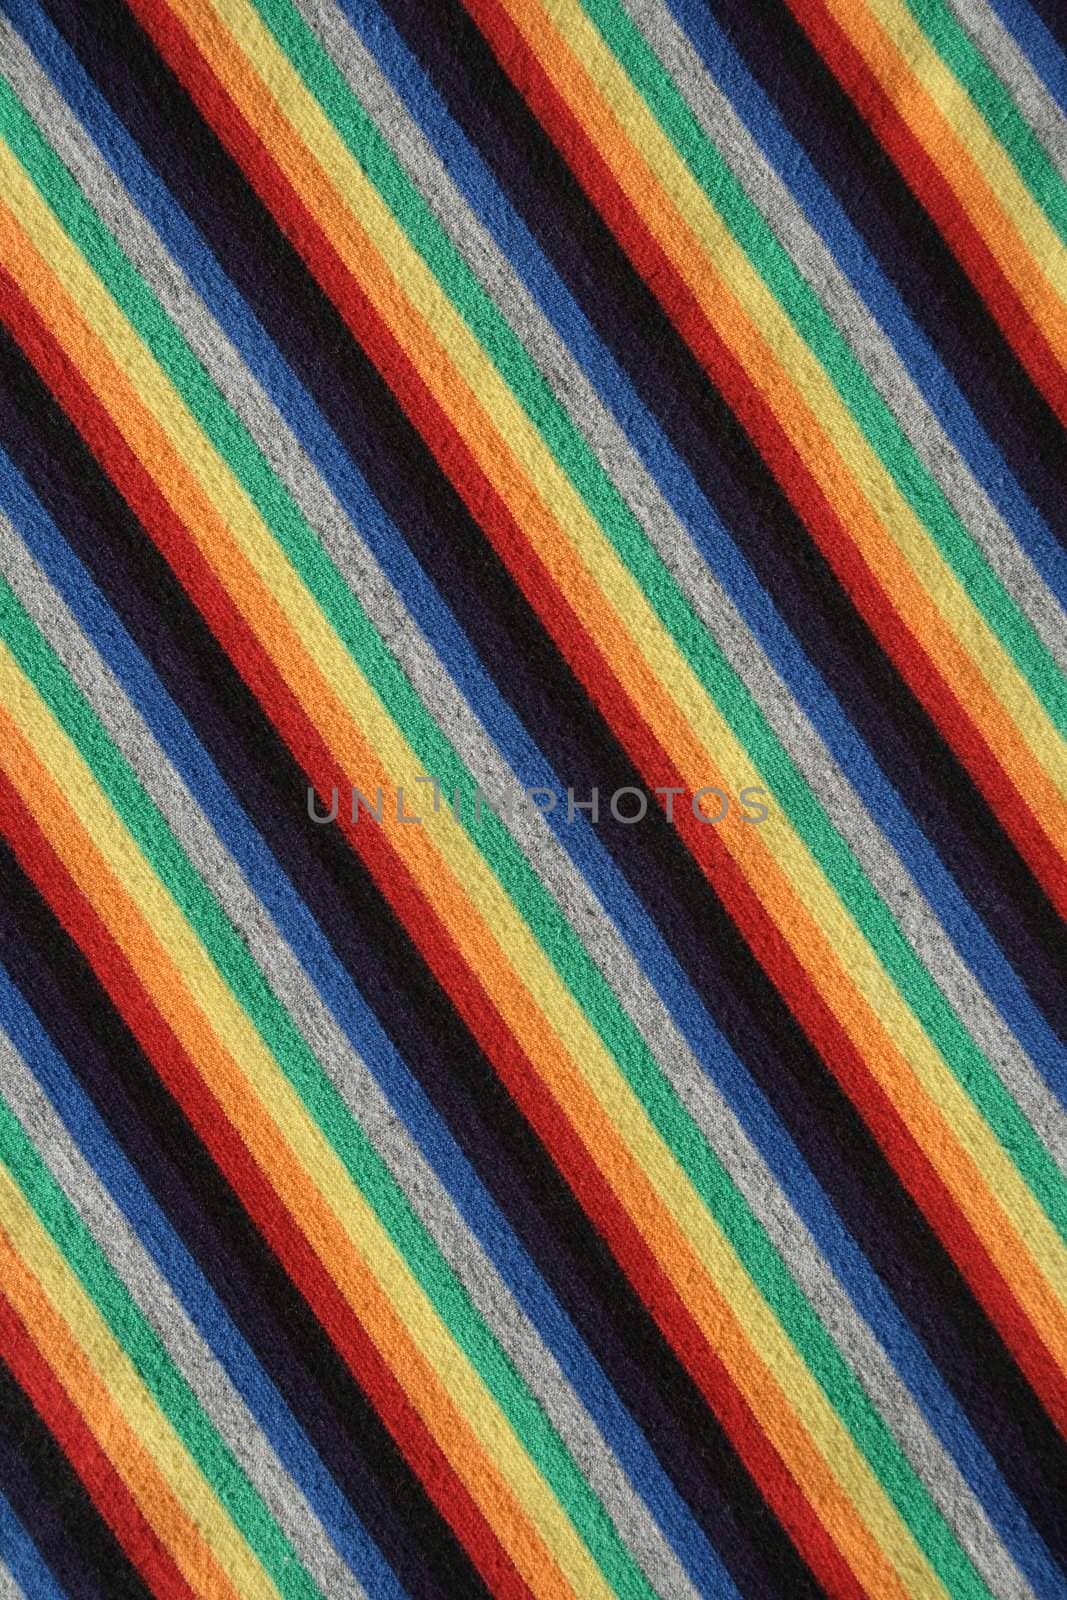 Colorful striped fabric background. Diagonal stripes.